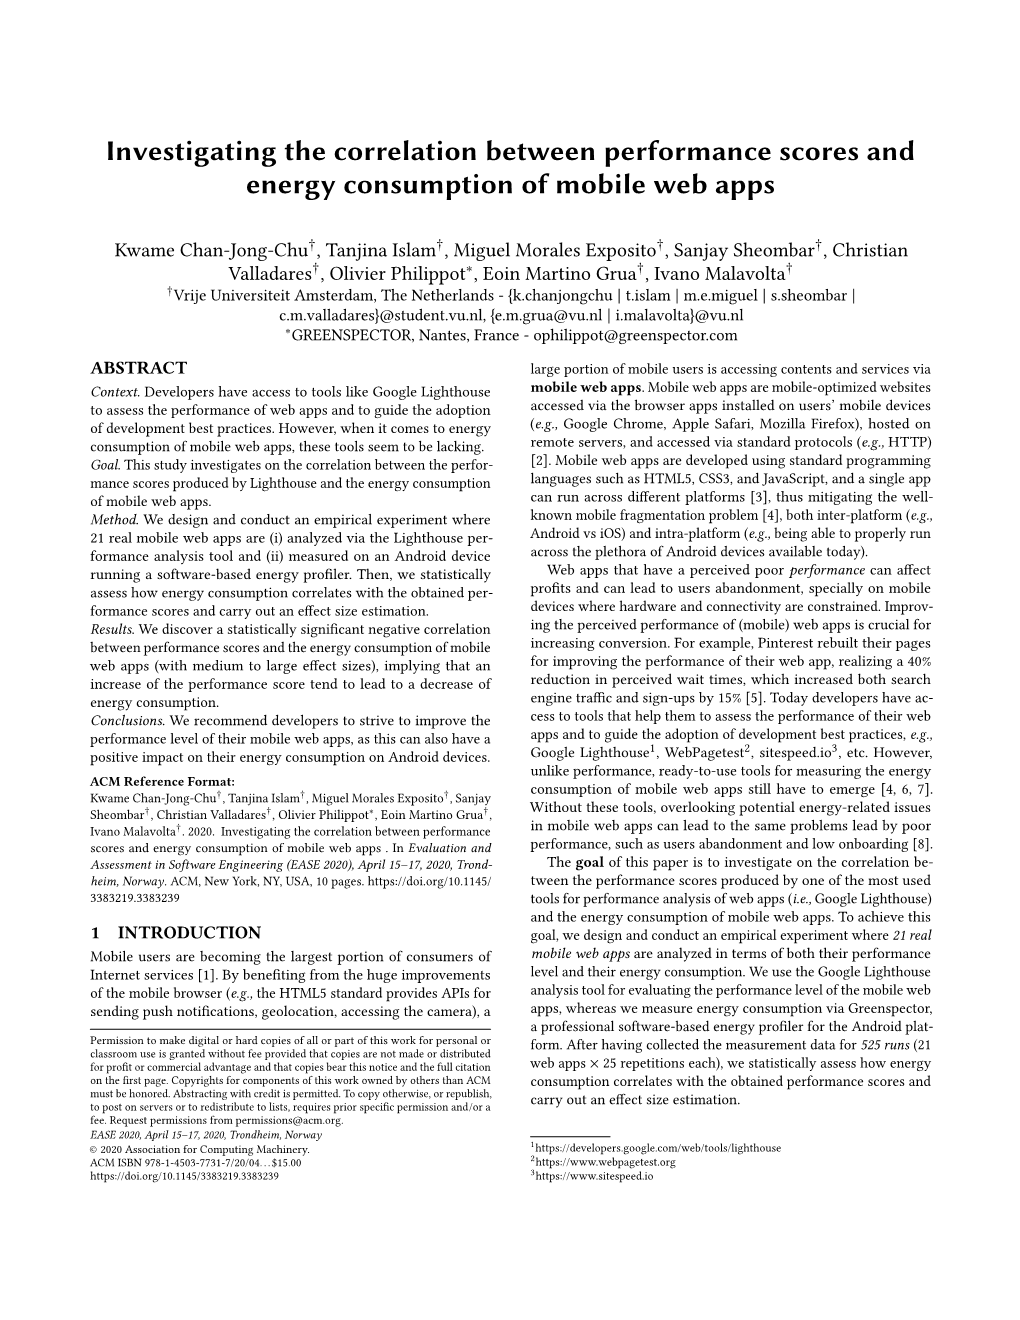 Investigating the Correlation Between Performance Scores and Energy Consumption of Mobile Web Apps